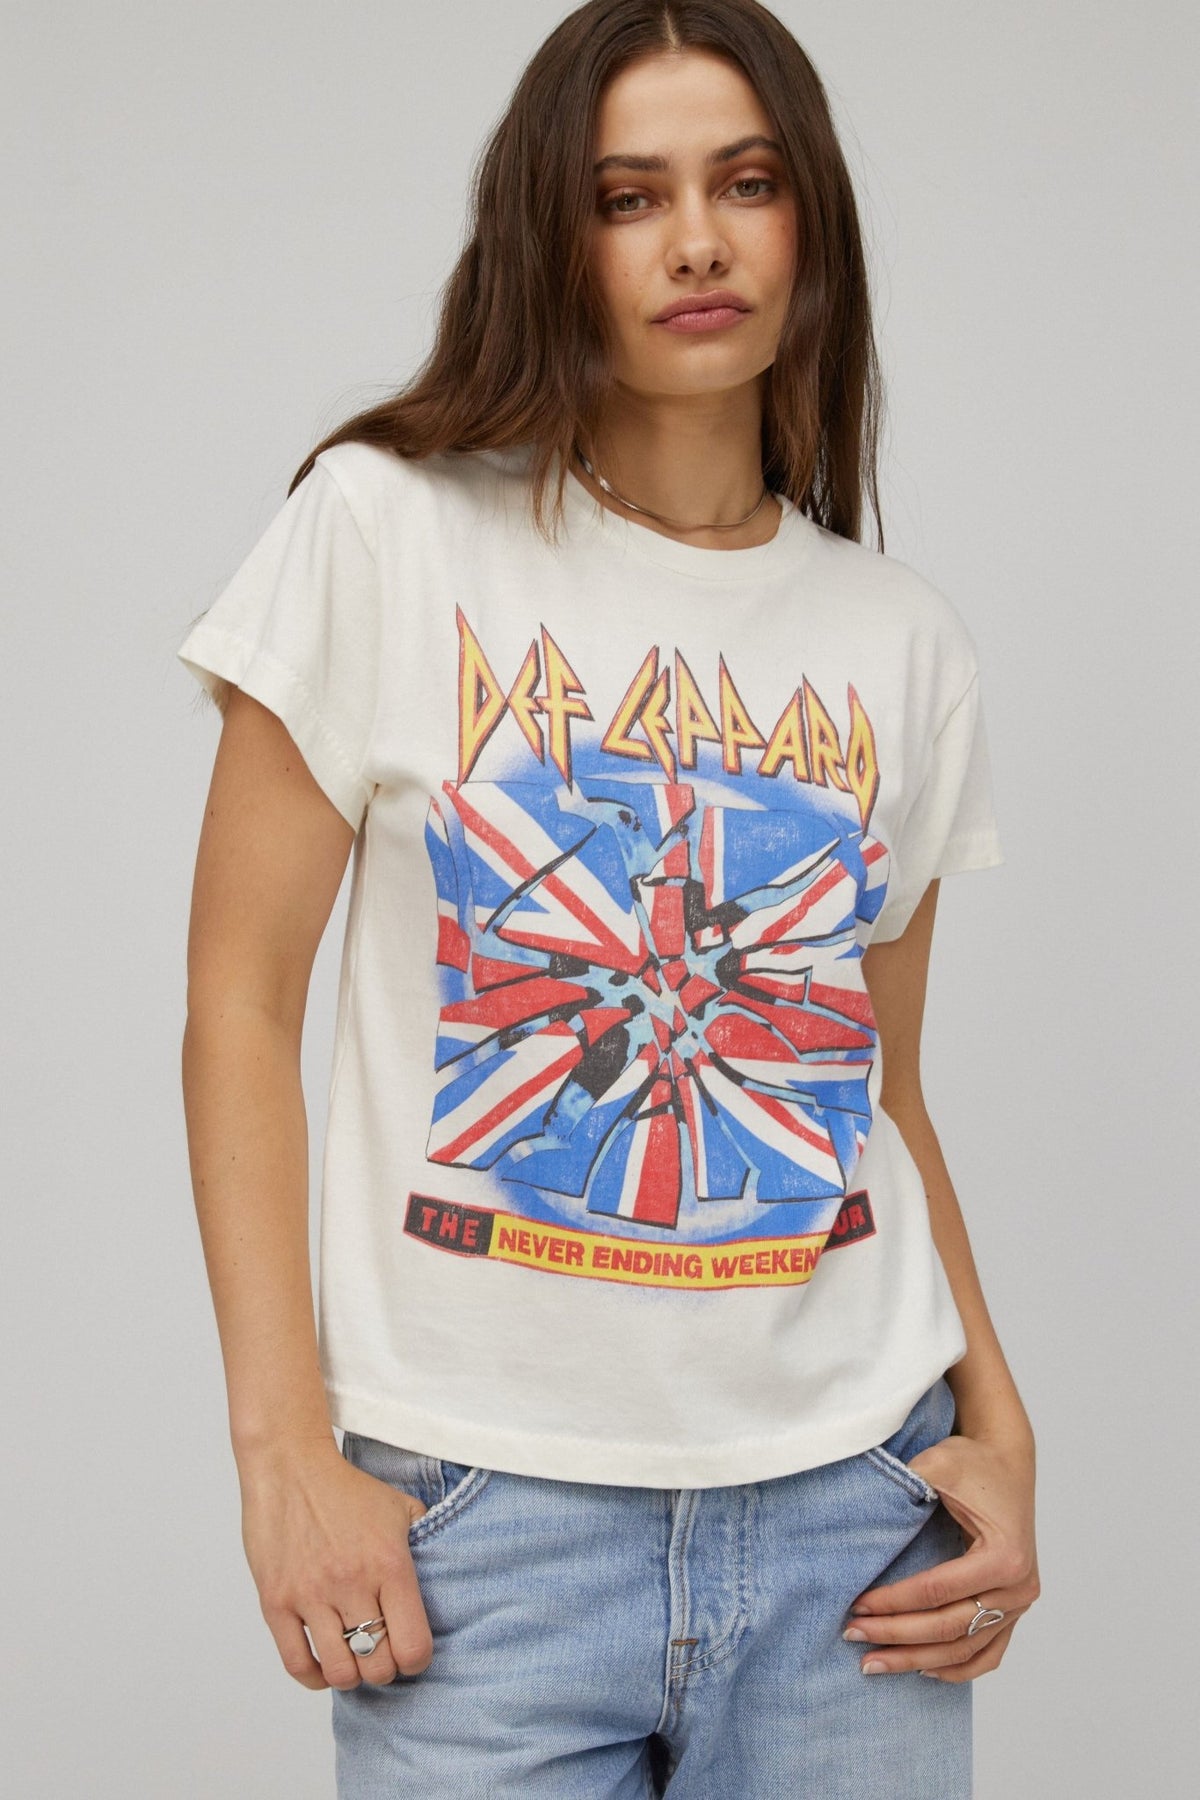 DAYDREAMER Def Leppard 1993 Never Ending Weekend Tour Tee in Vintage White - Graphic Tee - Blooming Daily